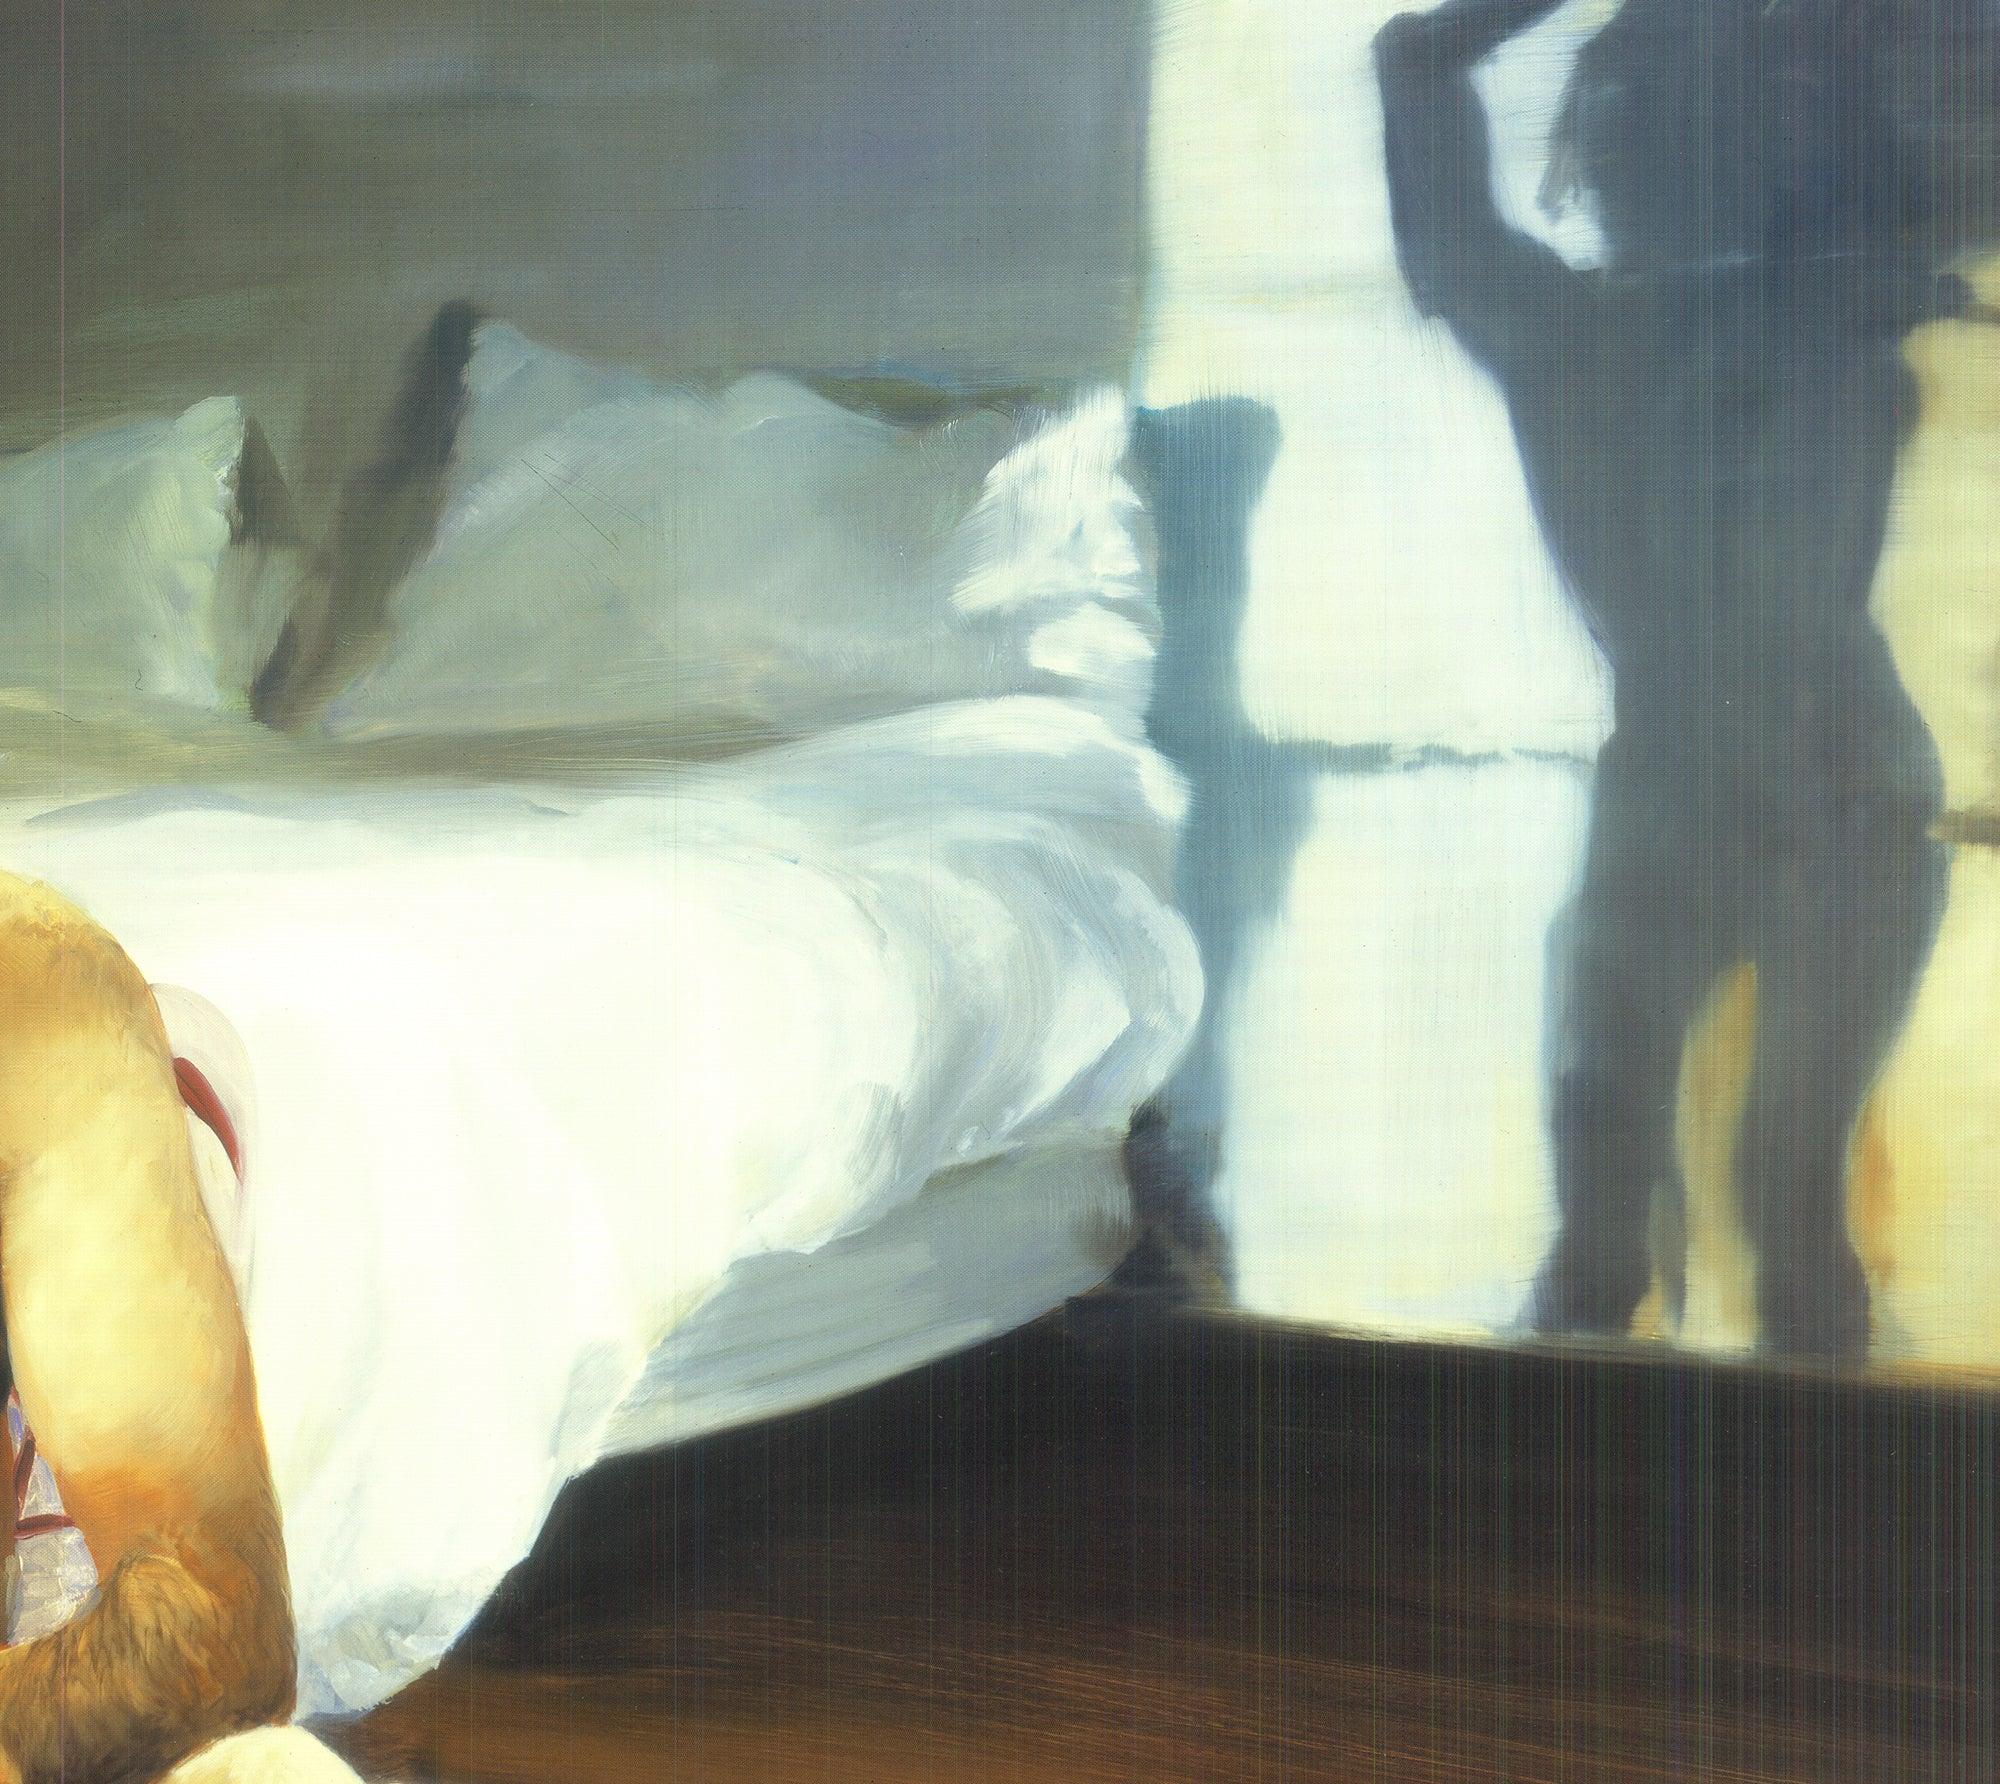 1984 Eric Fischl 'The Bed, the Chair, the Dancer